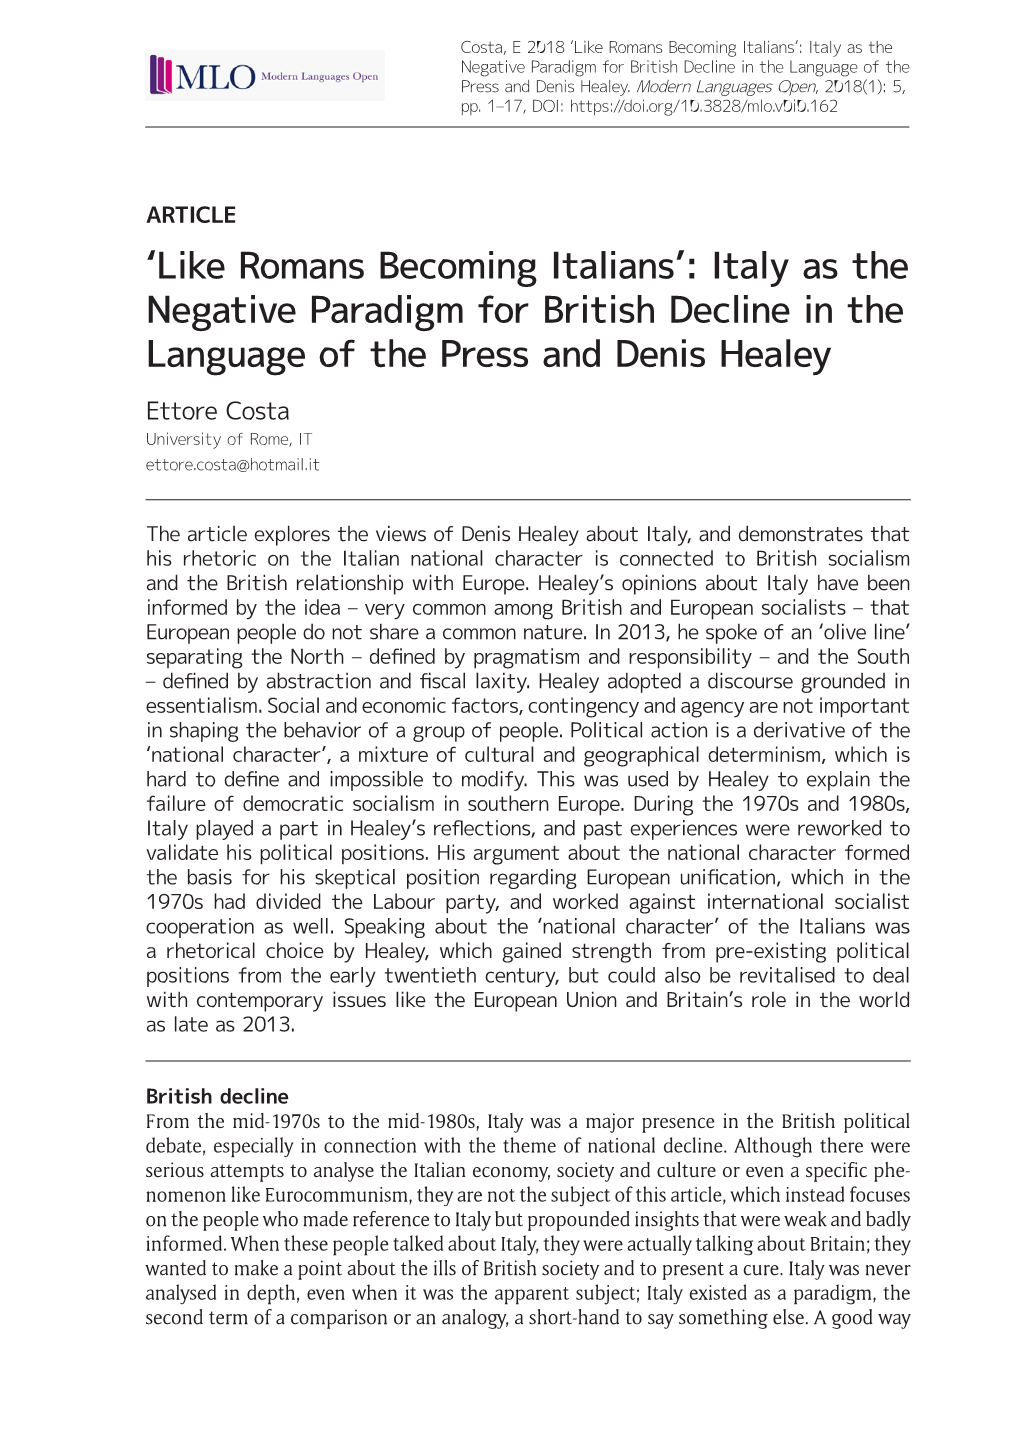 Italy As the Negative Paradigm for British Decline in the Language of the Press and Denis Healey